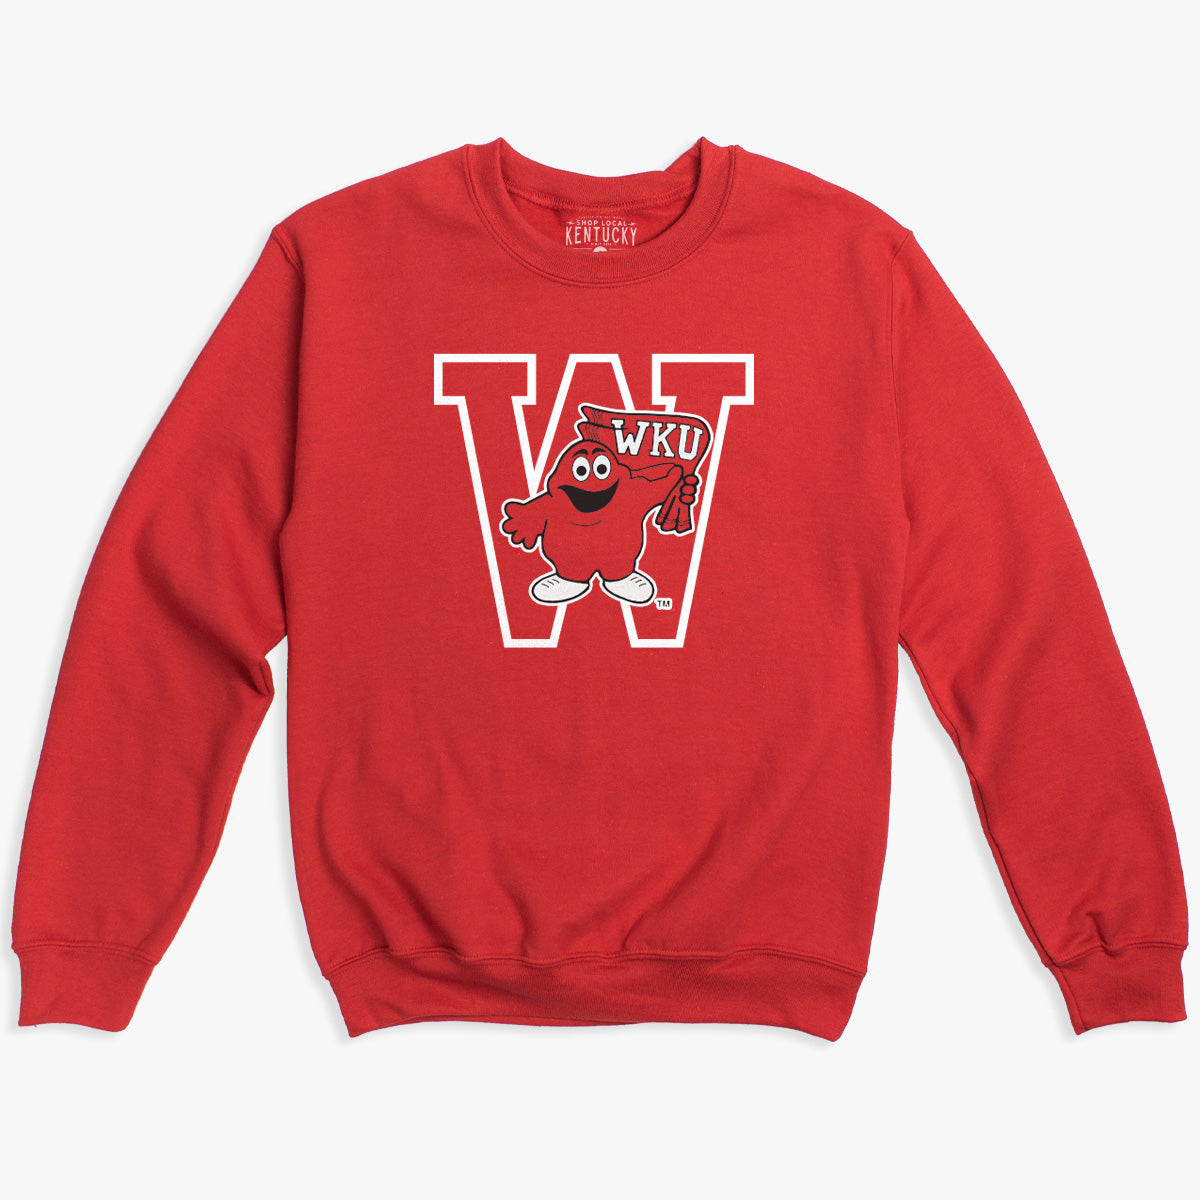  Louisville Kentucky KY Vintage Sports Design Red Design  Sweatshirt : Clothing, Shoes & Jewelry